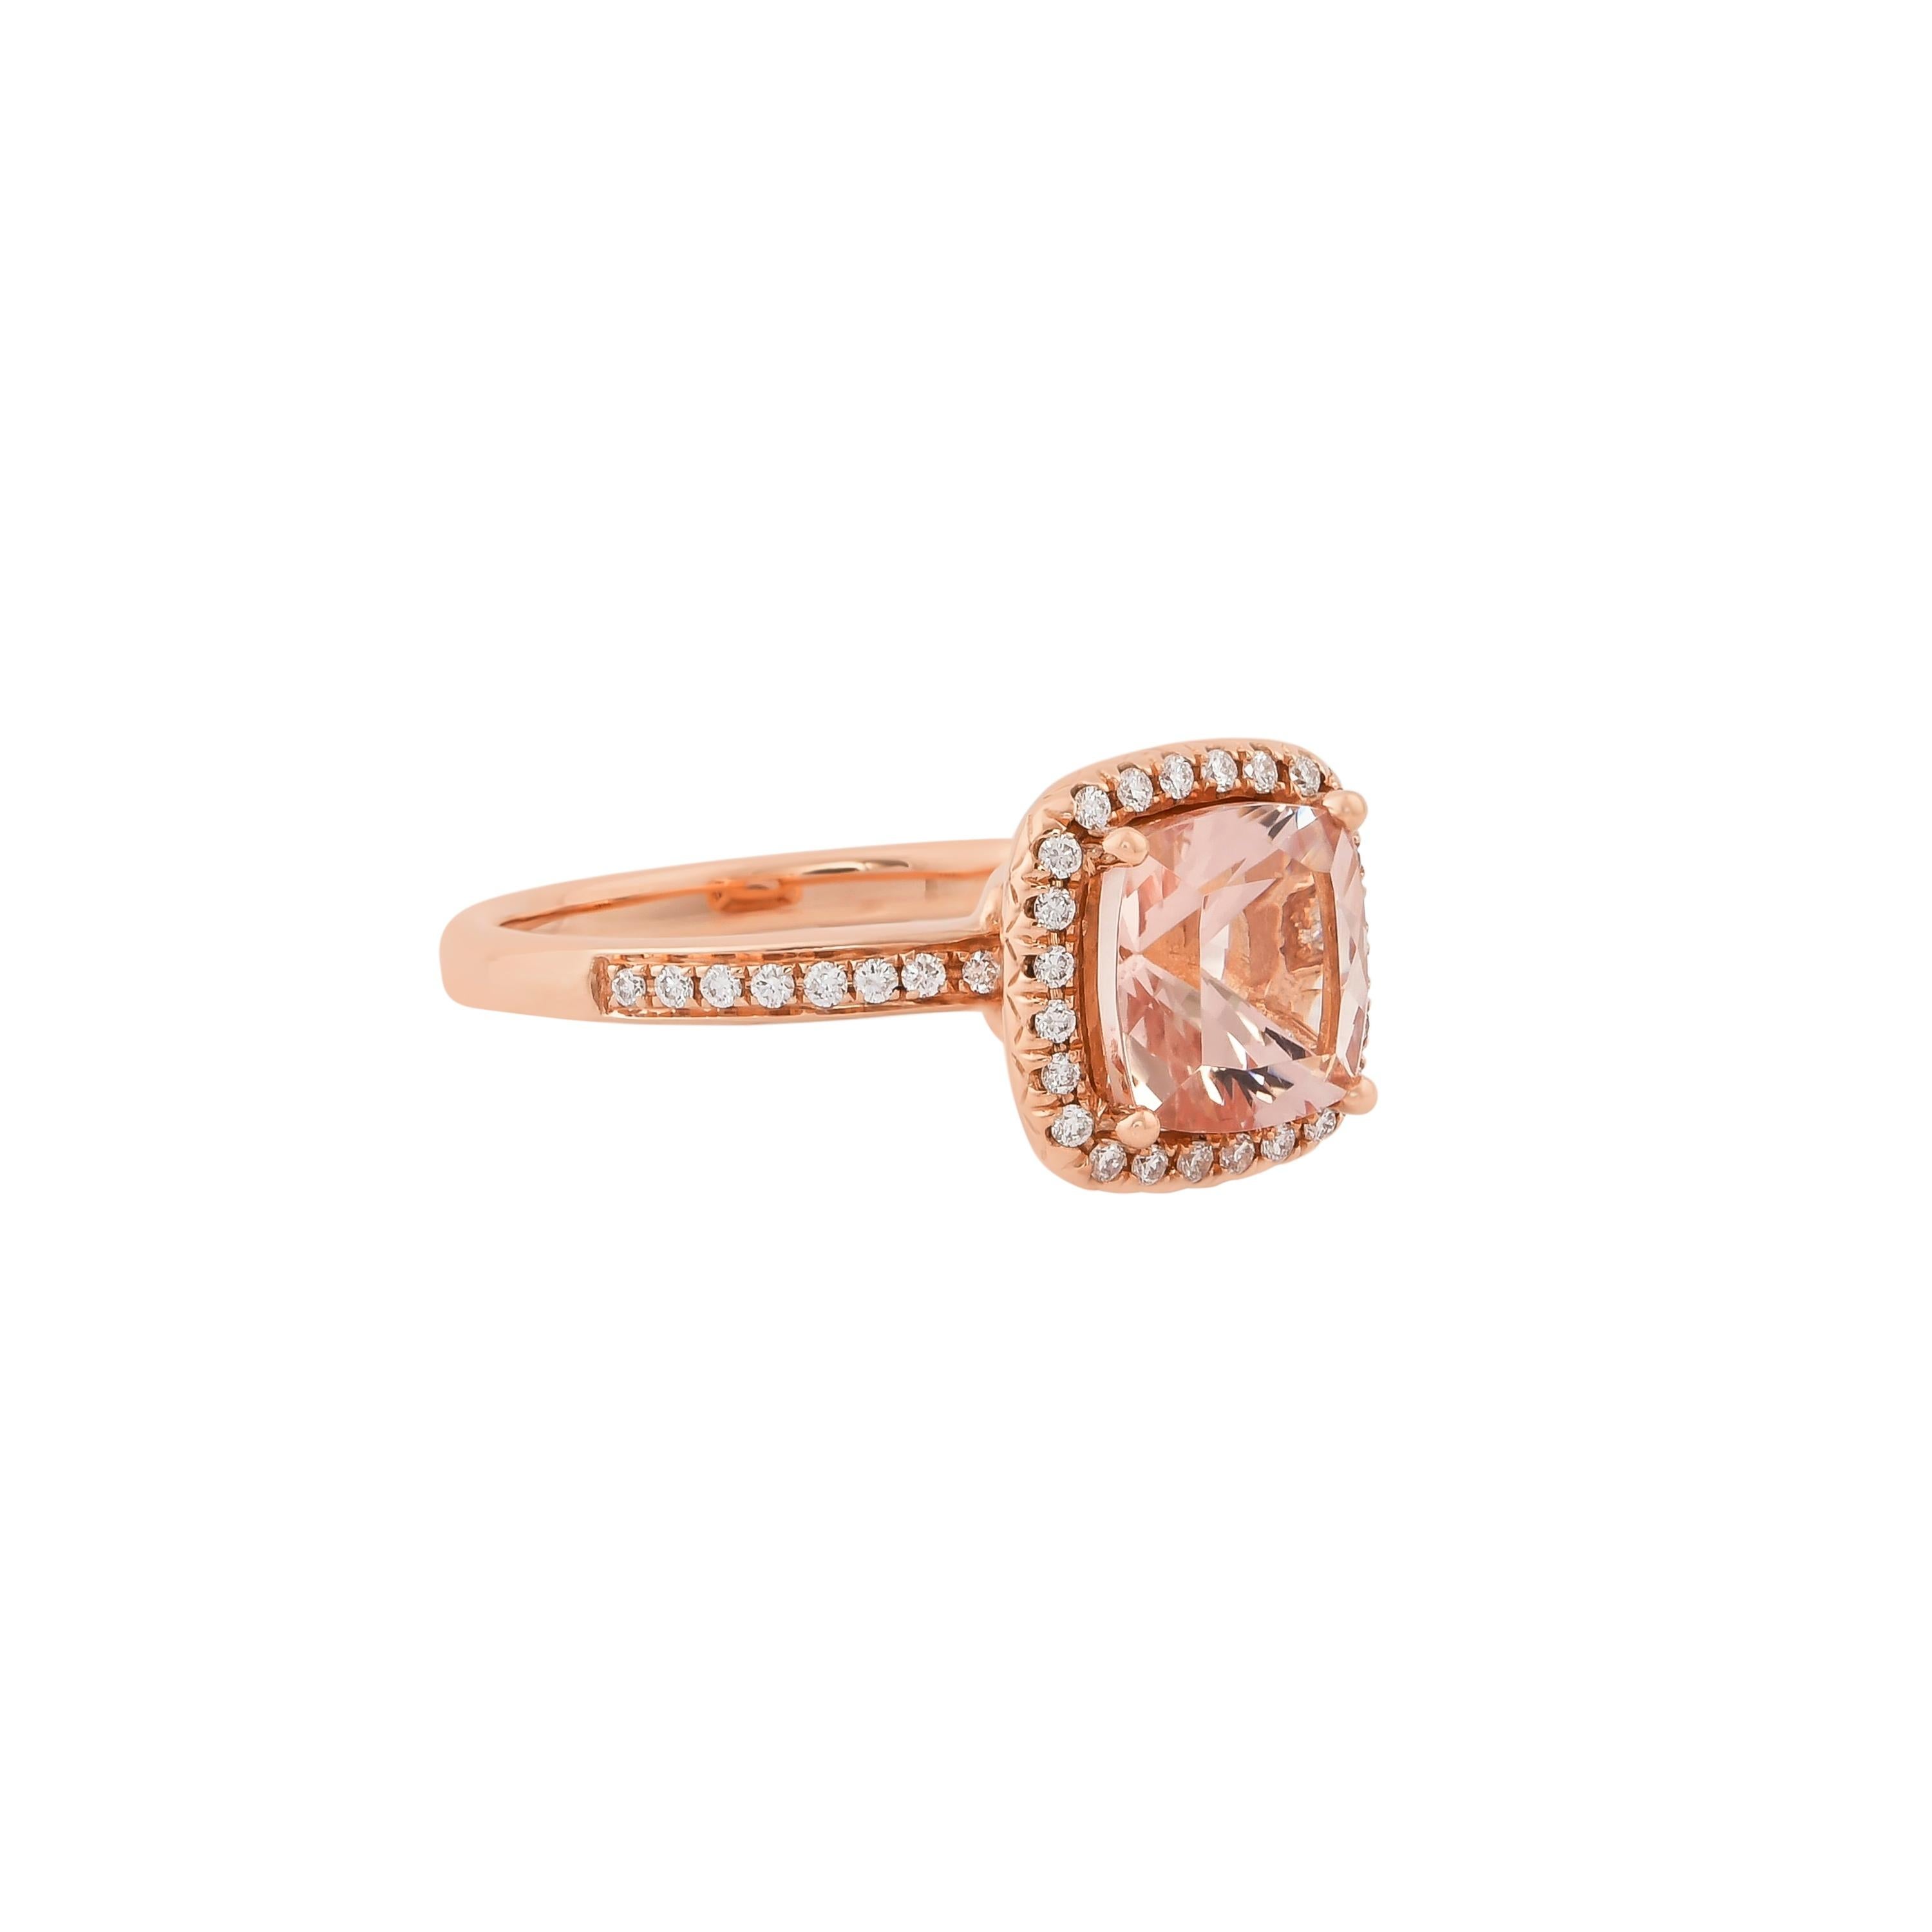 This collection features an array of magnificent morganites! Accented with diamonds these rings are made in rose gold and present a classic yet elegant look. 

Classic morganite ring in 18K rose gold with diamonds. 

Morganite: 2.2 carat cushion